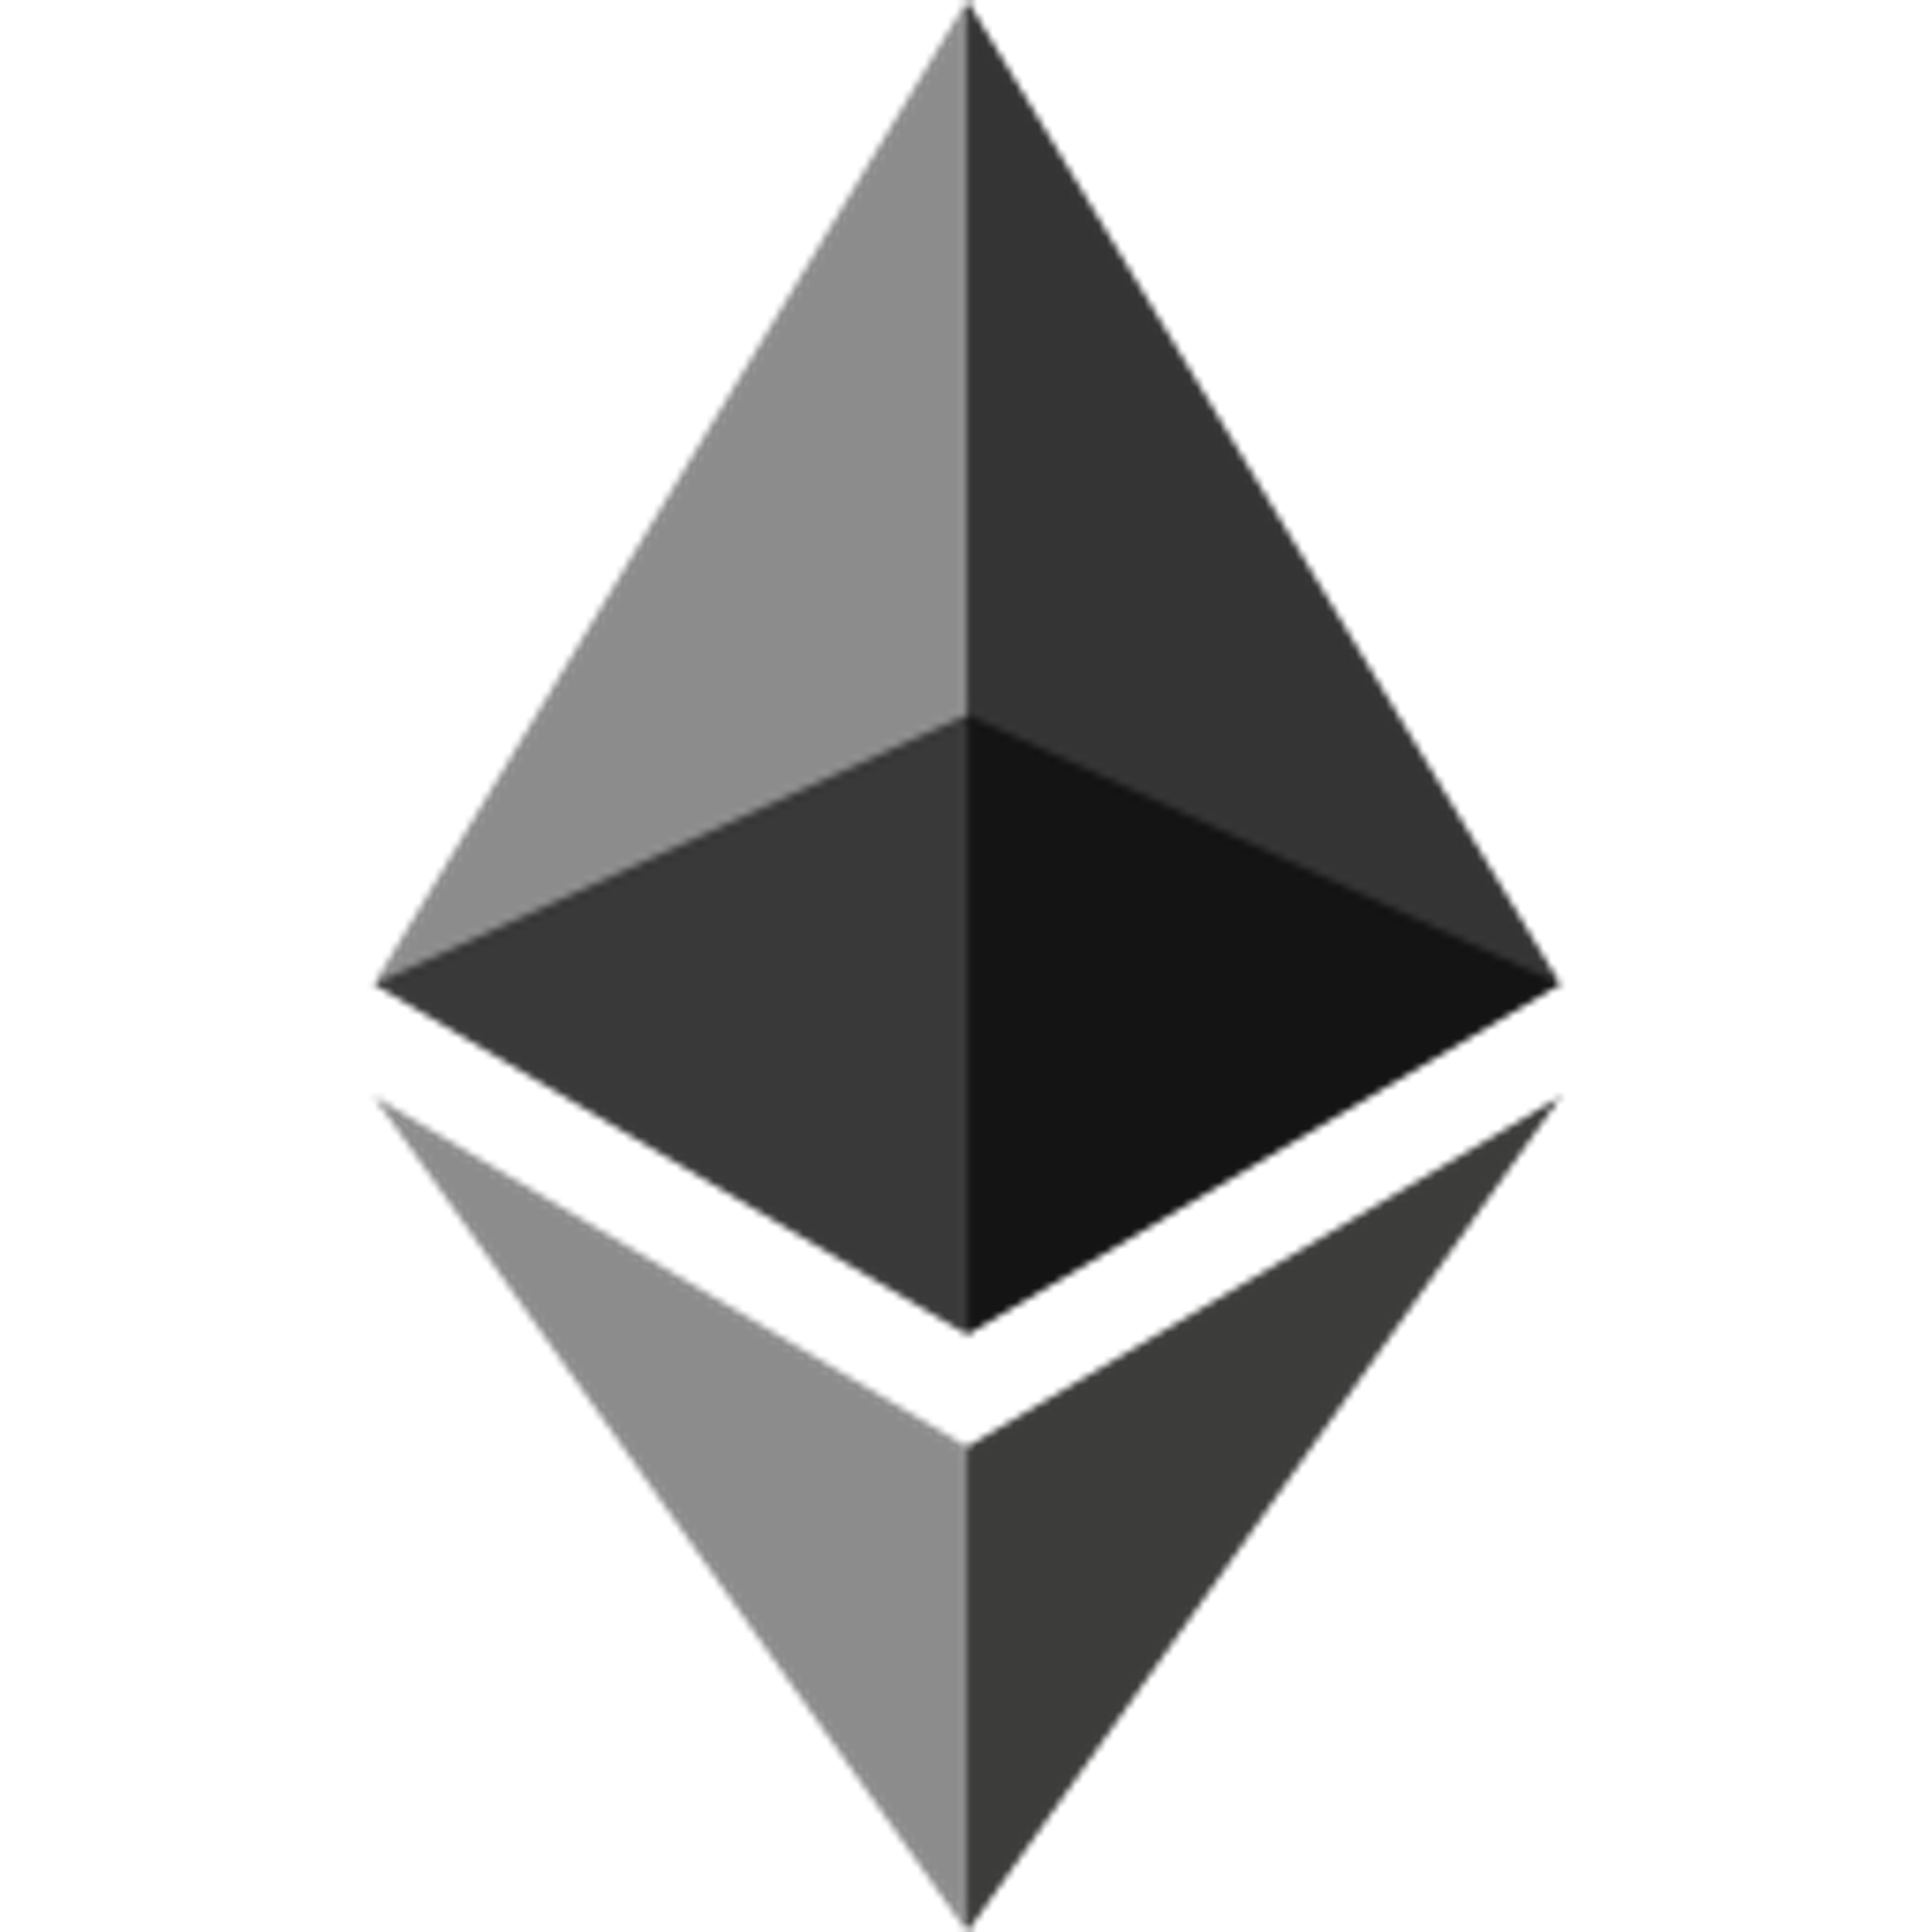 12 Reasons why Ethereum is undervalued